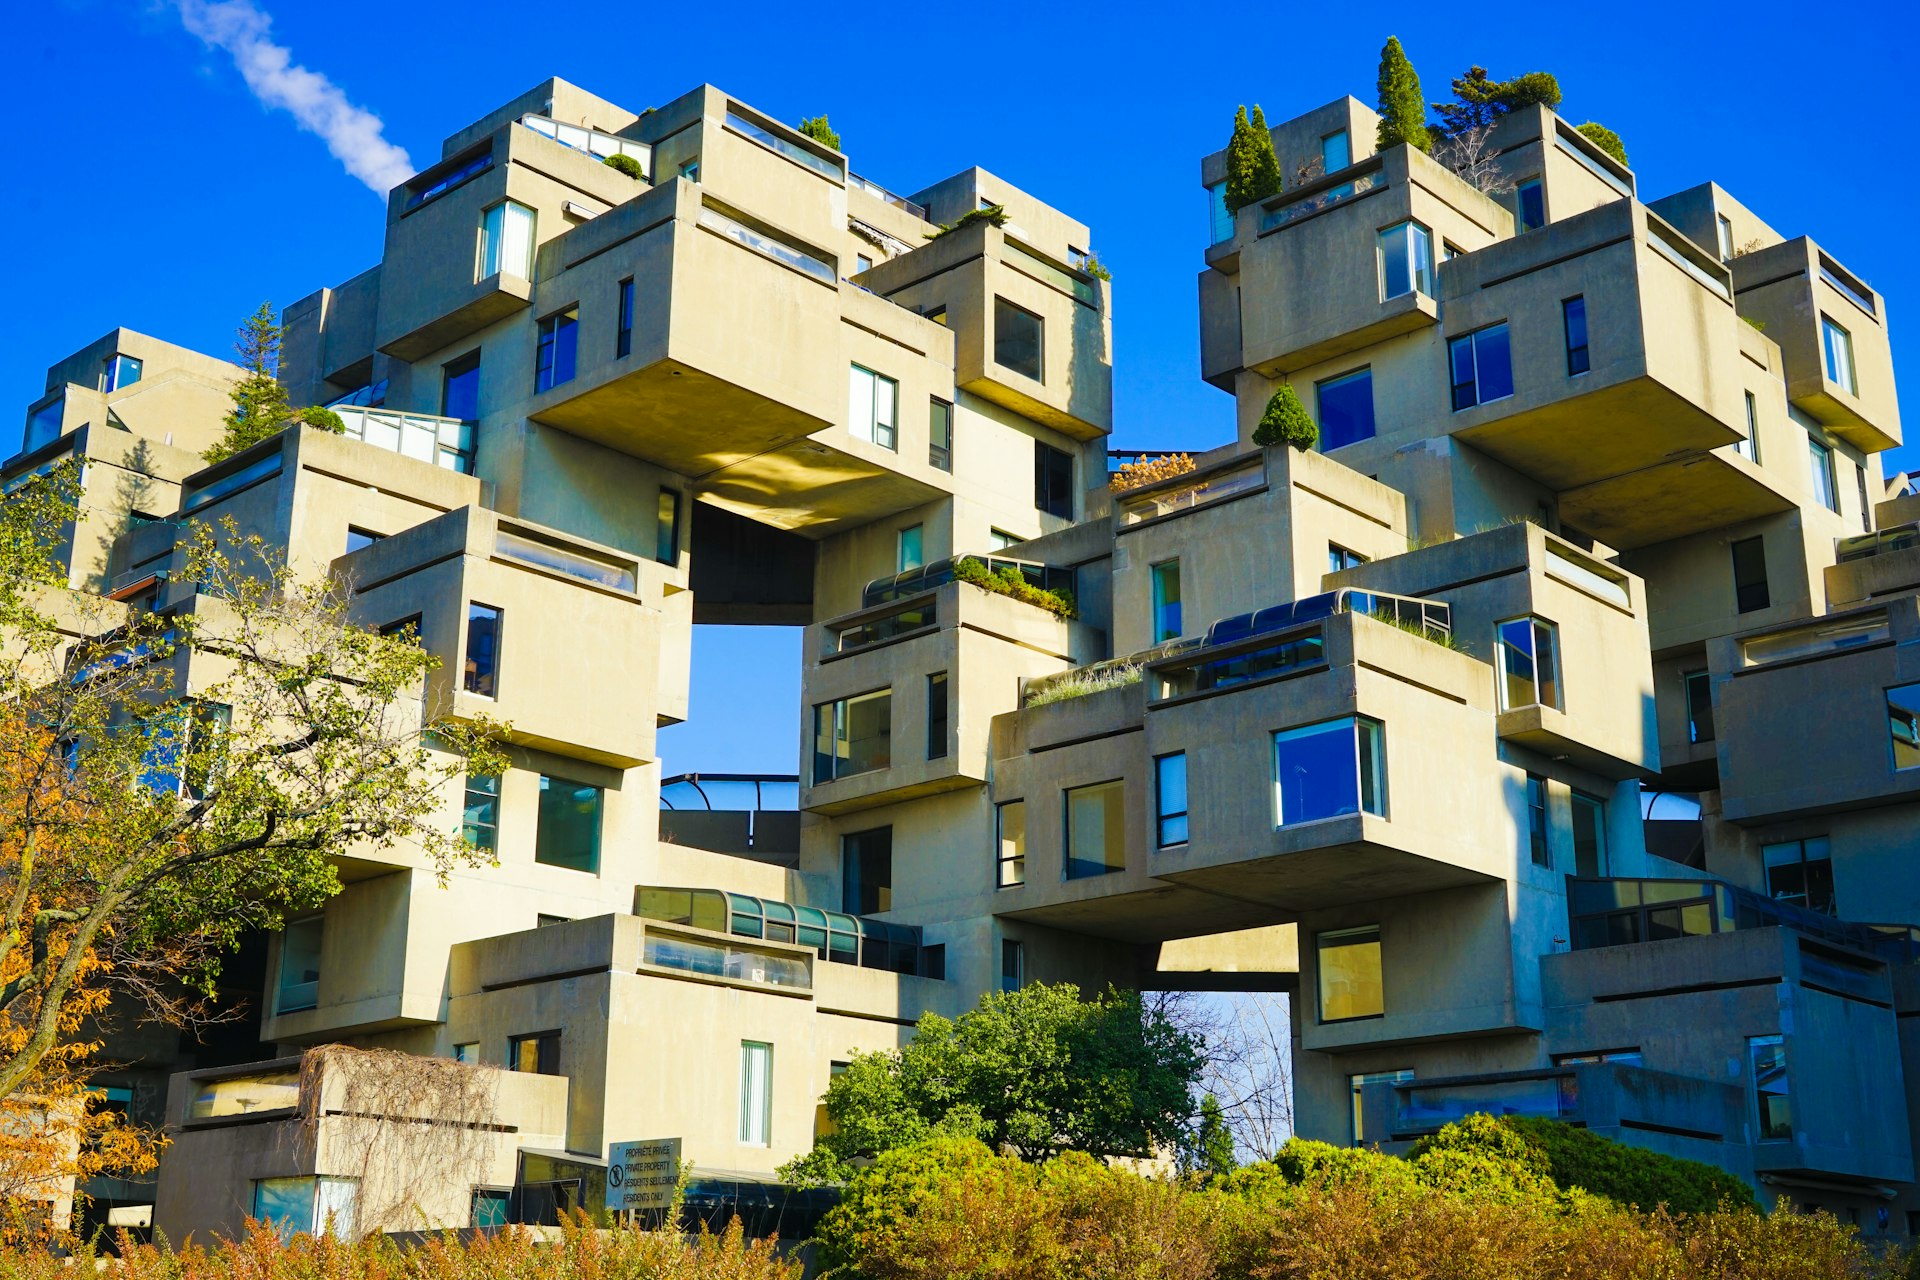 The eye-catching concrete forms of Habitat 67, Montreal, with separate buildings seemingly stacked on top of each other in a non-uniform way